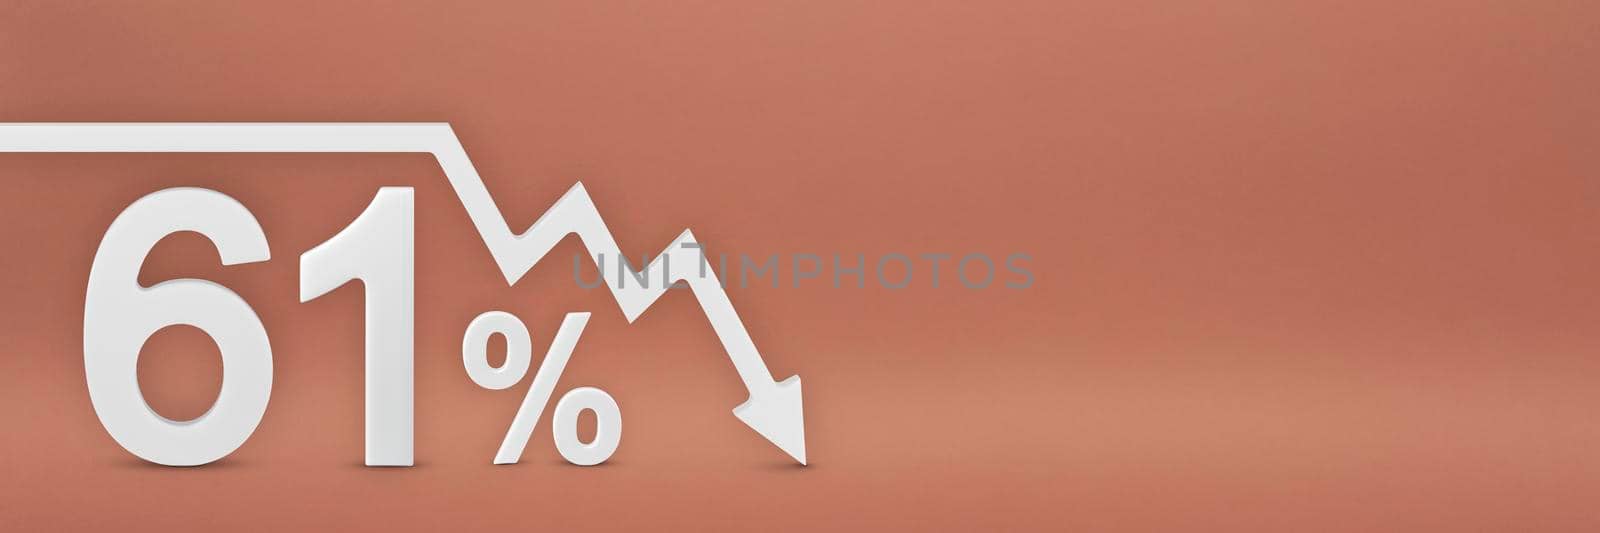 sixty-one percent, the arrow on the graph is pointing down. Stock market crash, bear market, inflation.Economic collapse, collapse of stocks.3d banner,61 percent discount sign on a red background